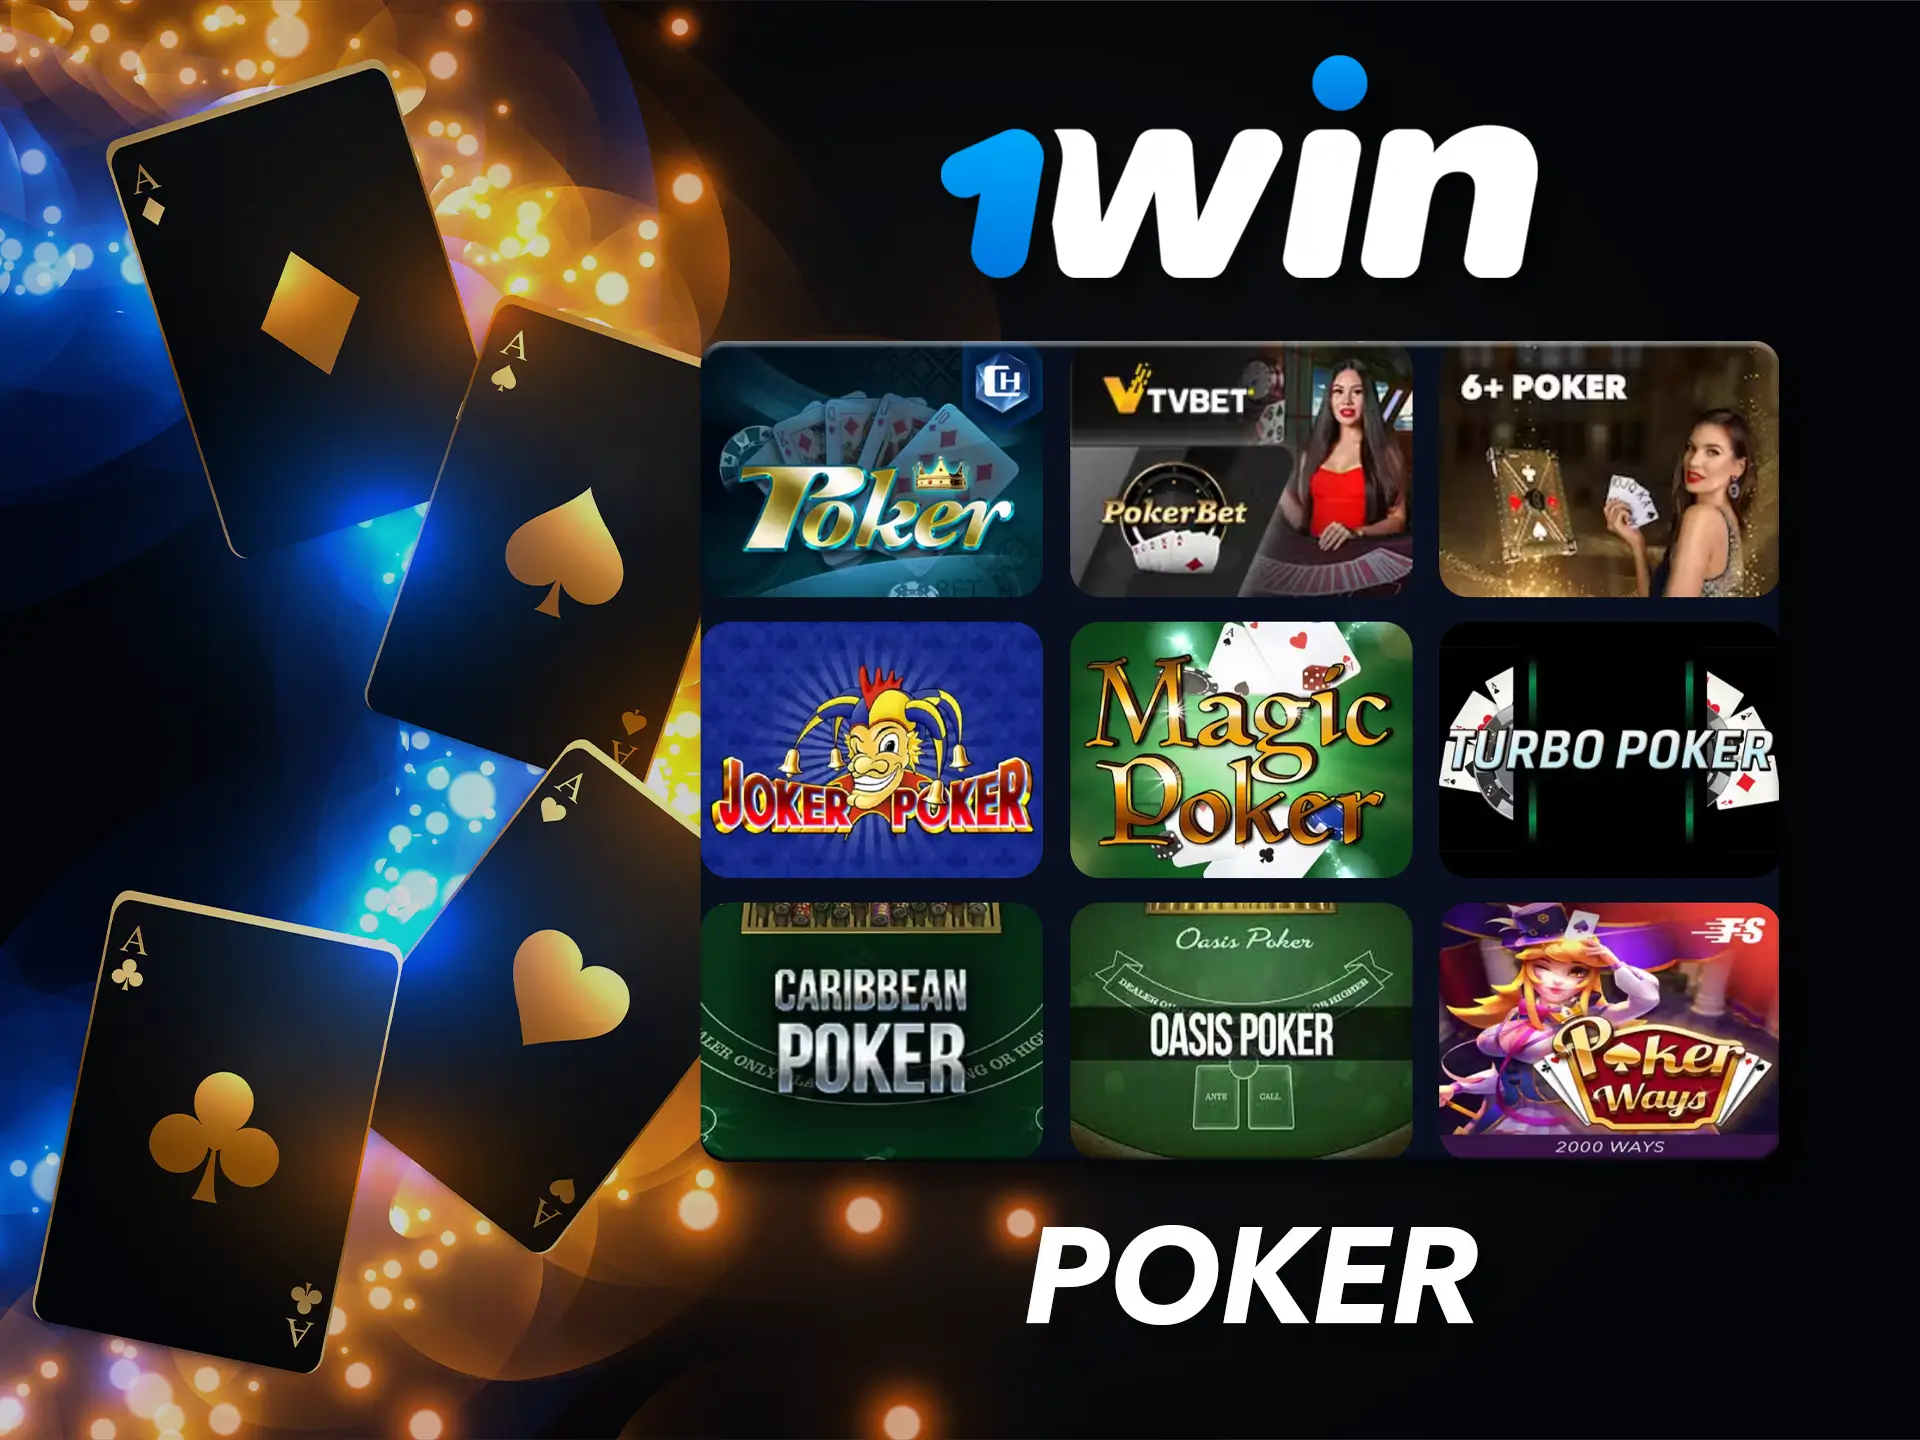 Play and use your poker skills with other 1Win Casino customers.